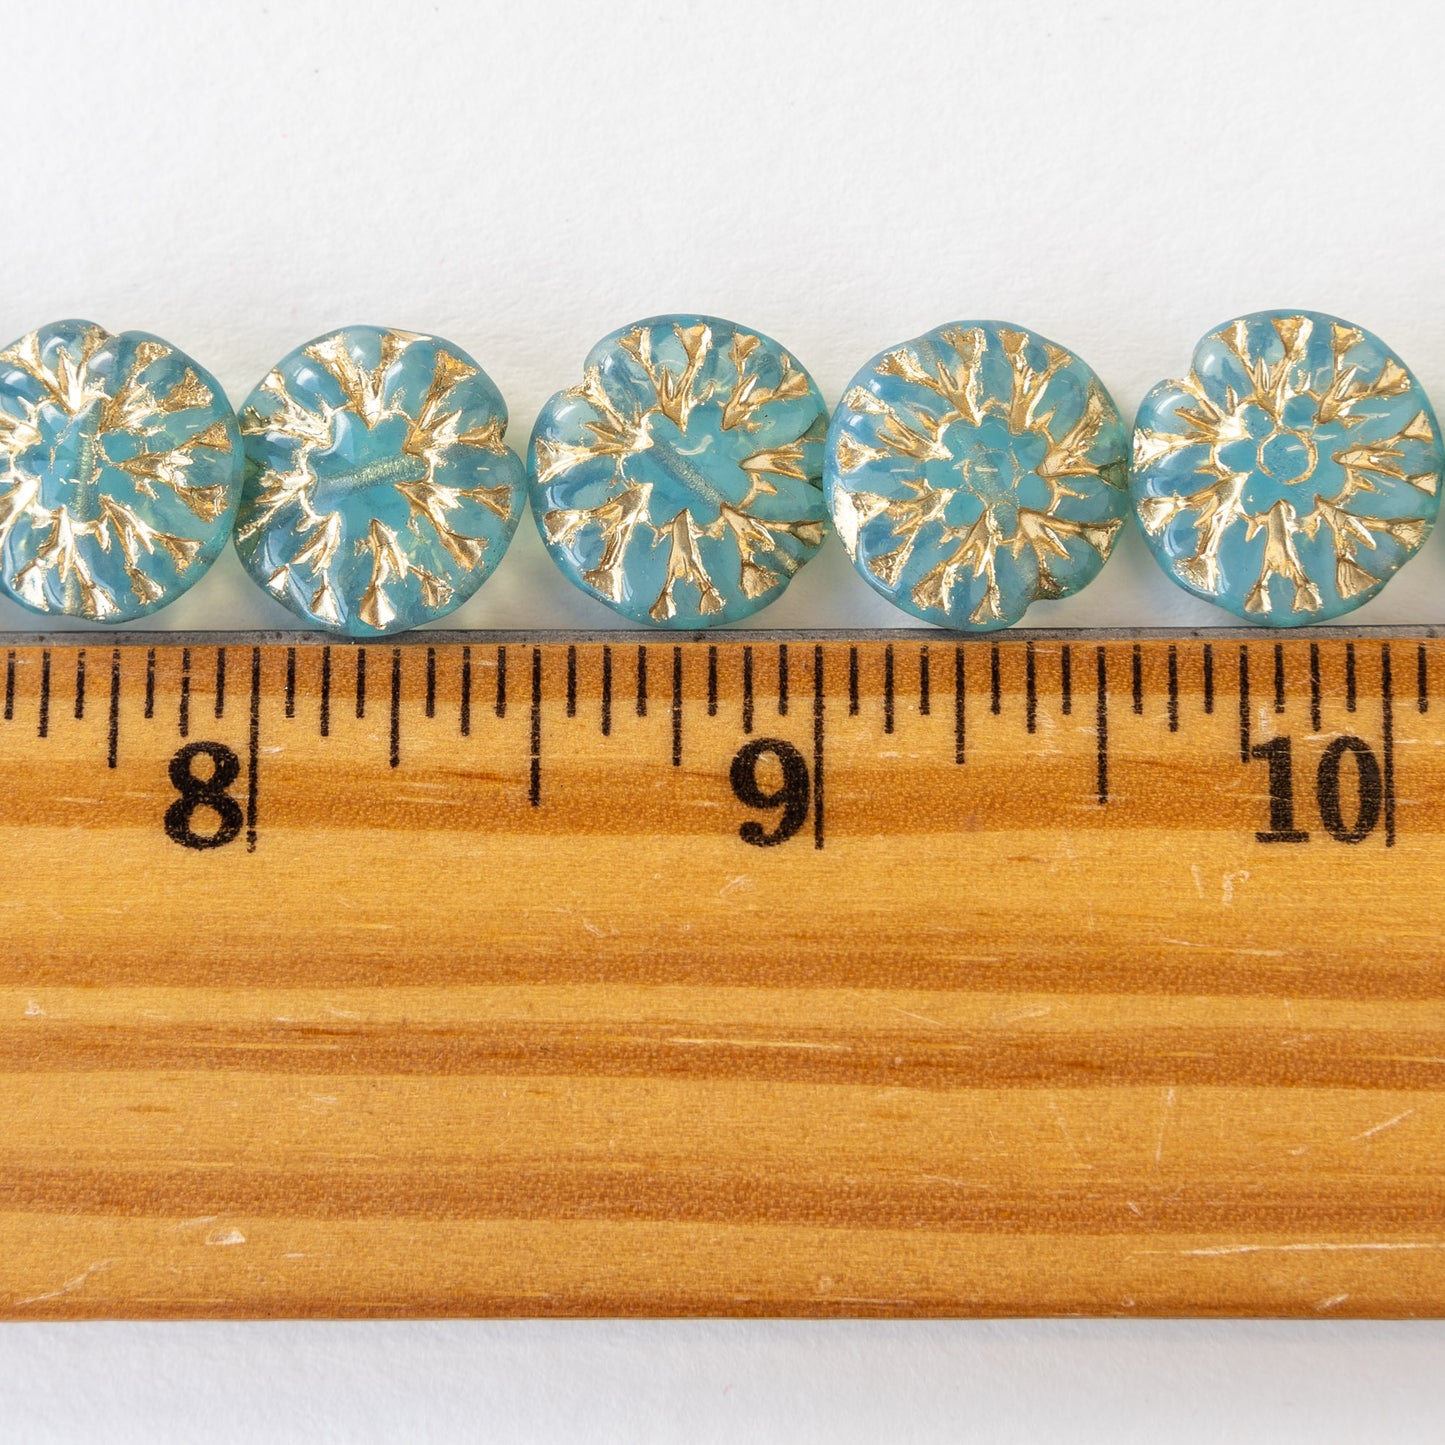 Load image into Gallery viewer, 14mm Dahlia Flower Beads - Seafoam with Aqua Wash - 10 beads
